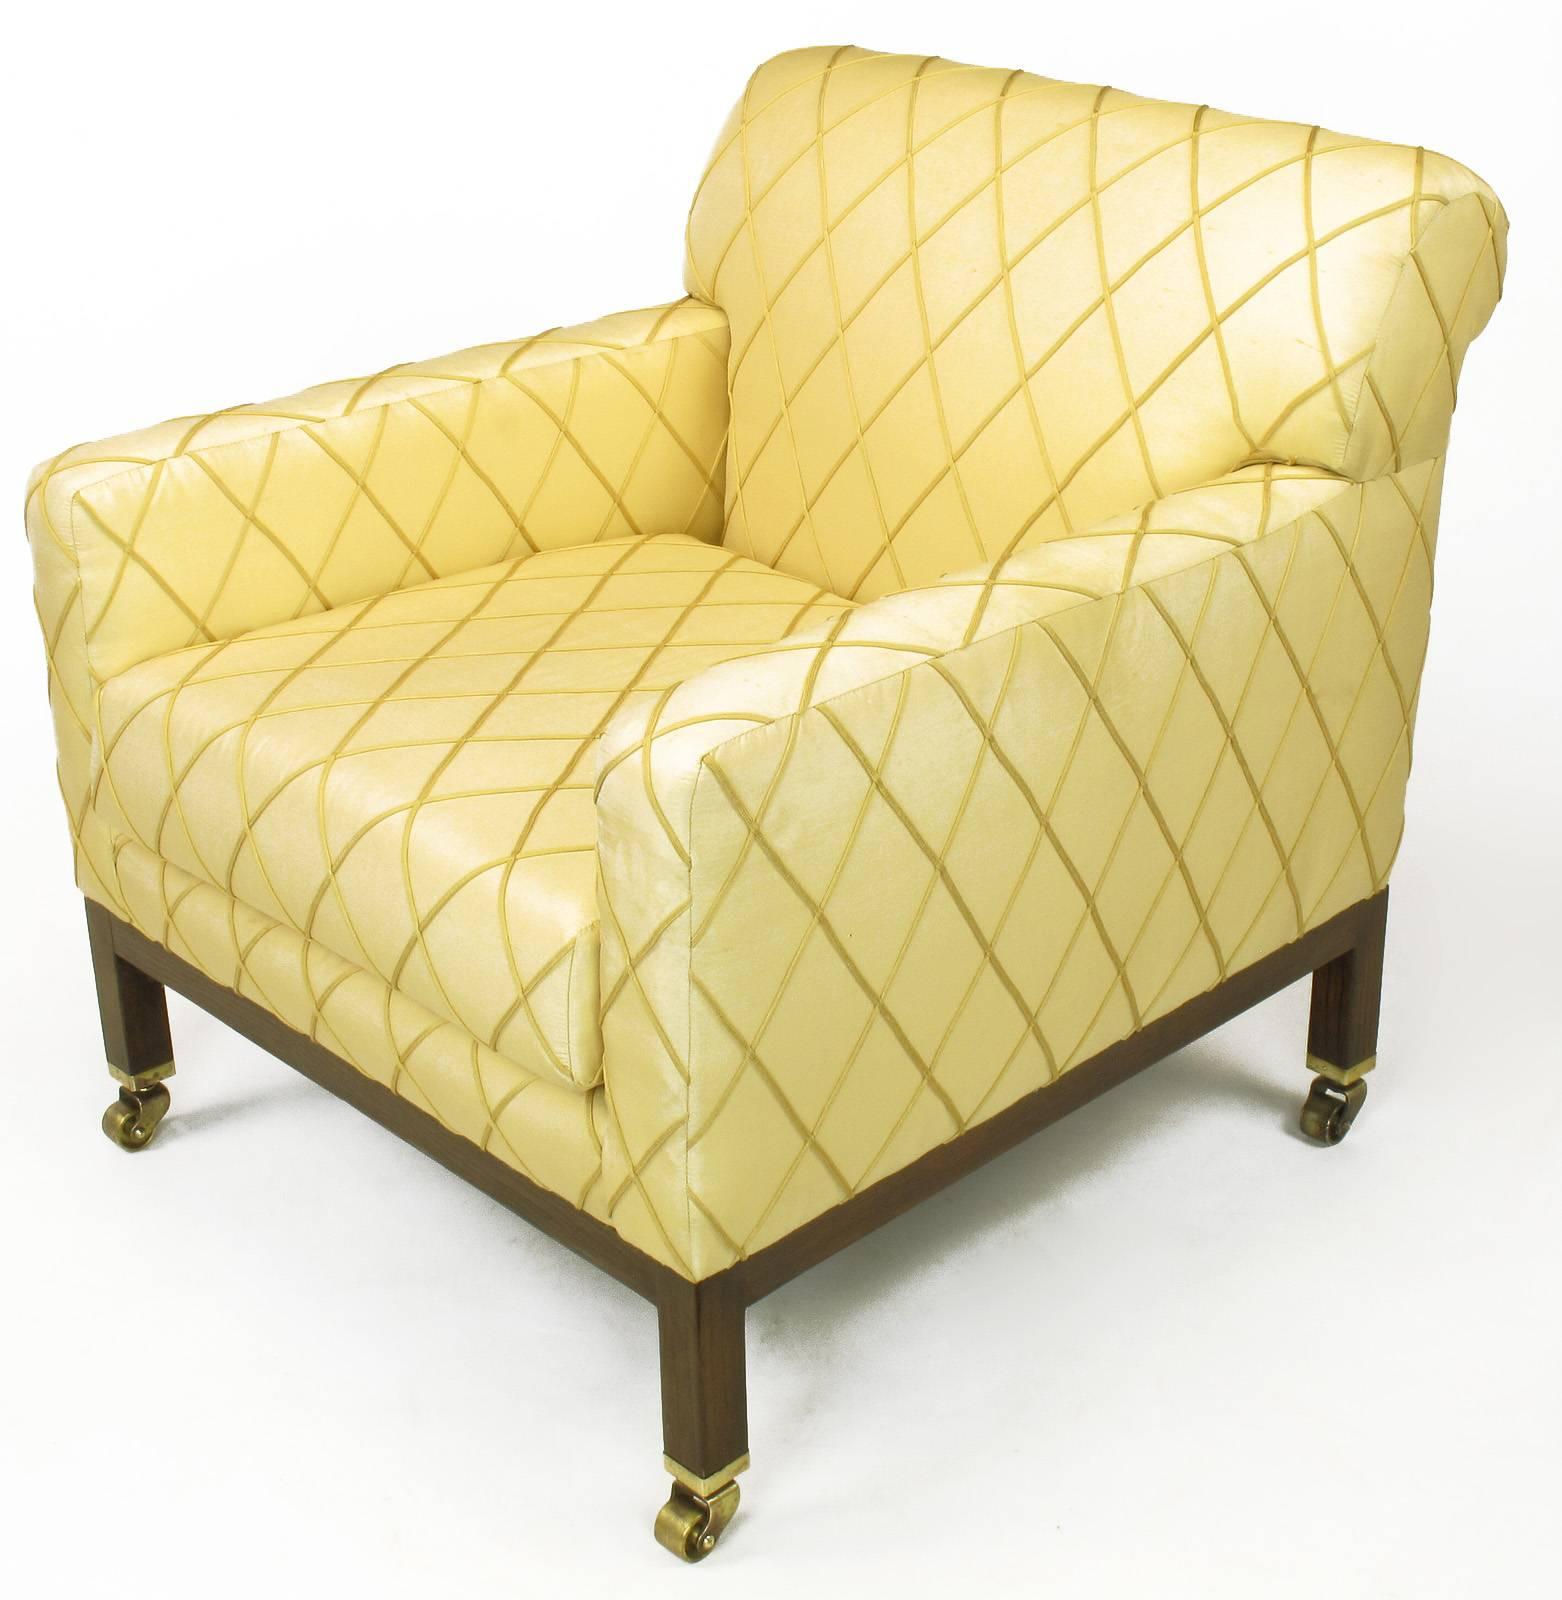 Edward Wormley for Dunbar club chair with rolled back, ash wood Parsons style legs with solid brass sabots and castors. Older saffron silk upholstery with embroidered harlequin pattern in very good condition. Second matching chair in need of